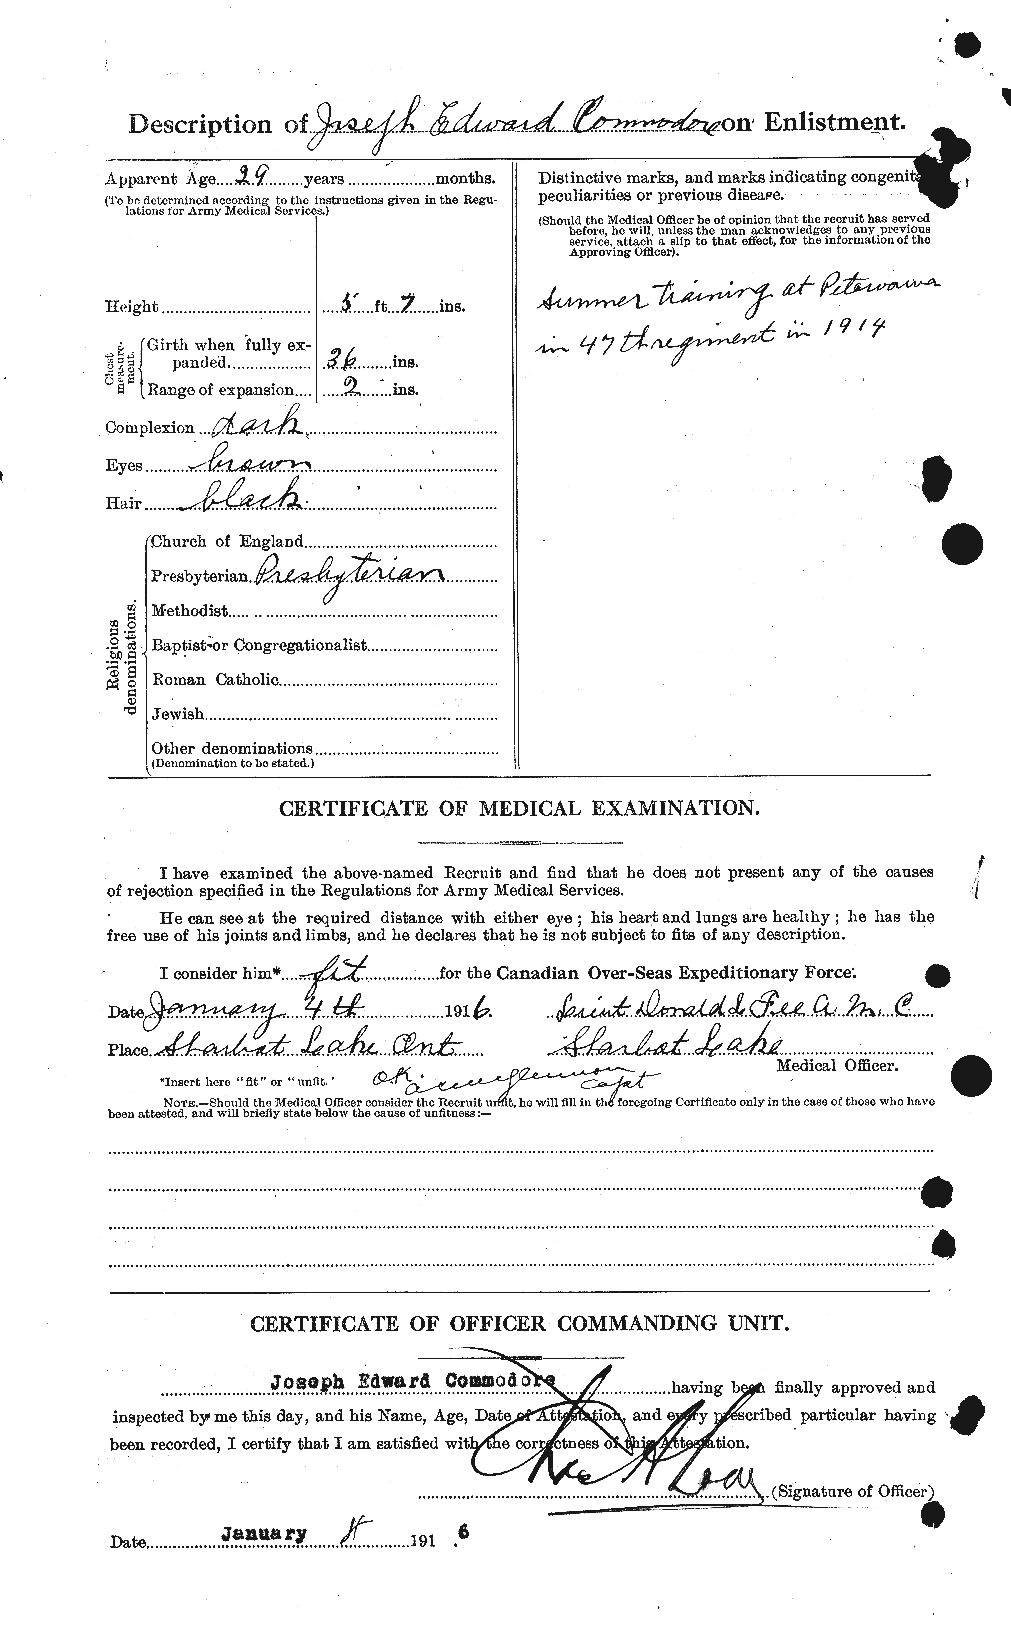 Personnel Records of the First World War - CEF 068730b